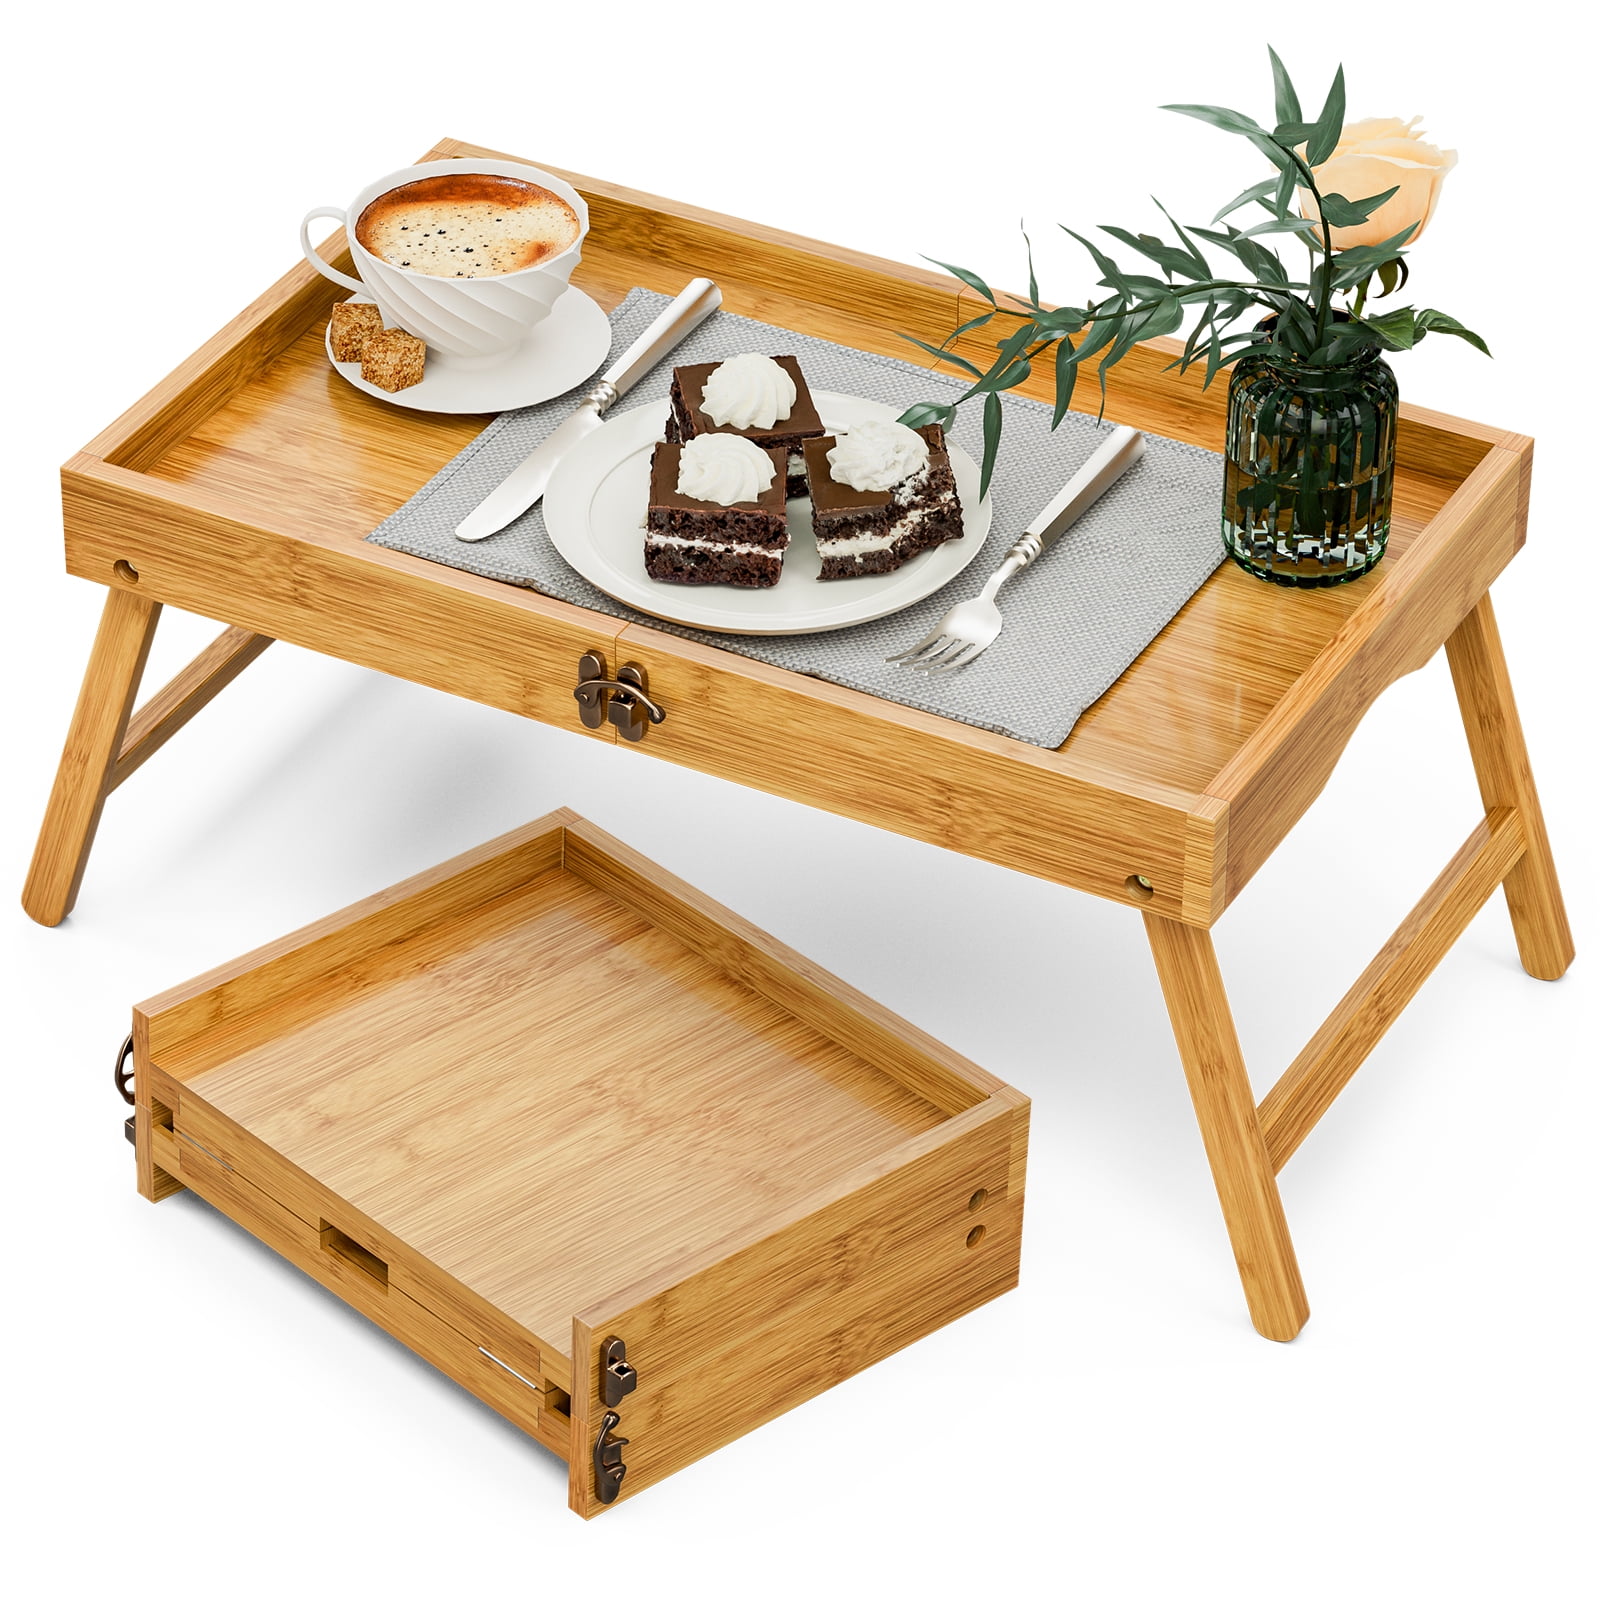  Bamboo Serving Tray,Food Tray for Eating on Bed,Coffee